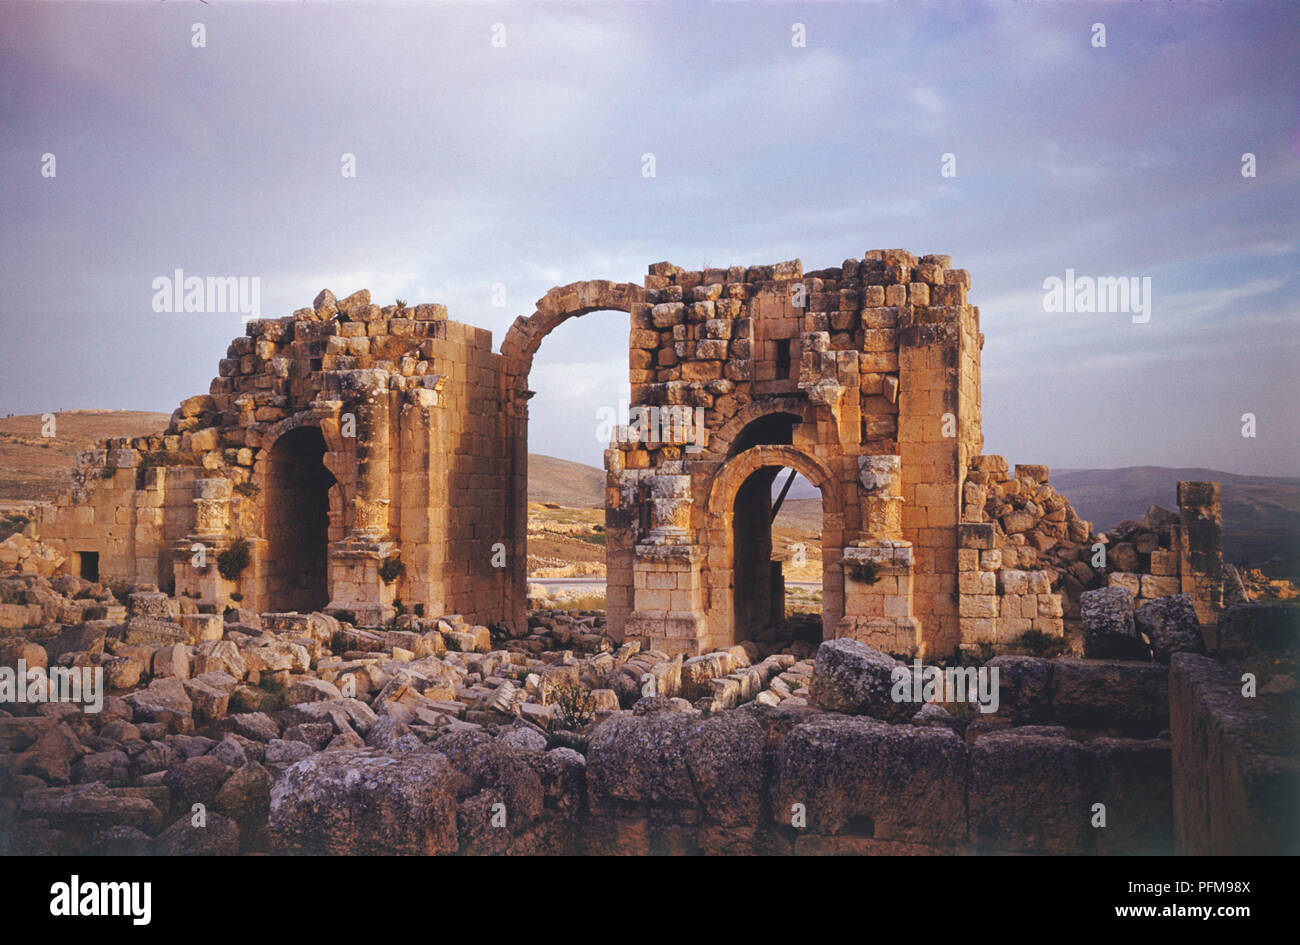 Jordan, triumphal Arch built to honour the visit of Emperor Hadrian to the ancient Roman site of Jerash, 48 km north of Amman, one of the largest and most well-preserved sites of Roman architecture in the world outside Italy. Stock Photo